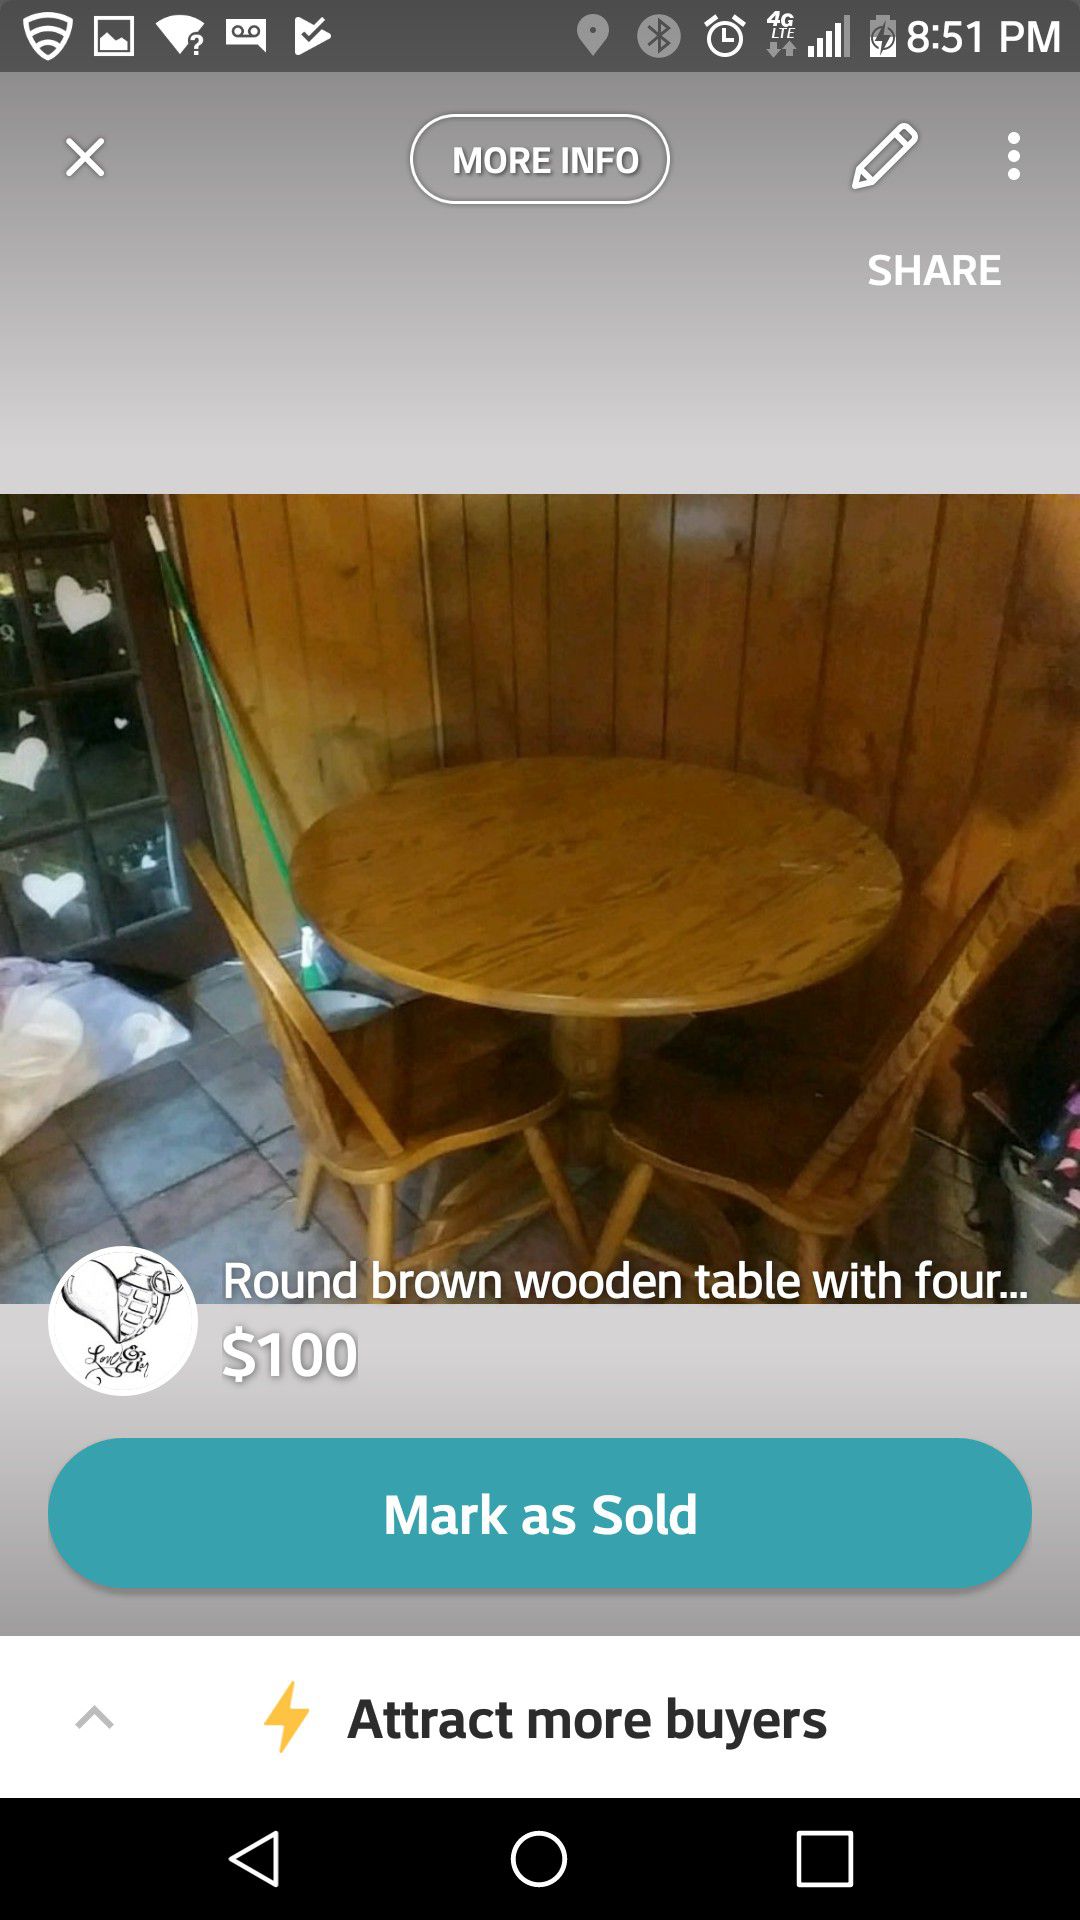 With matching 4 chairs